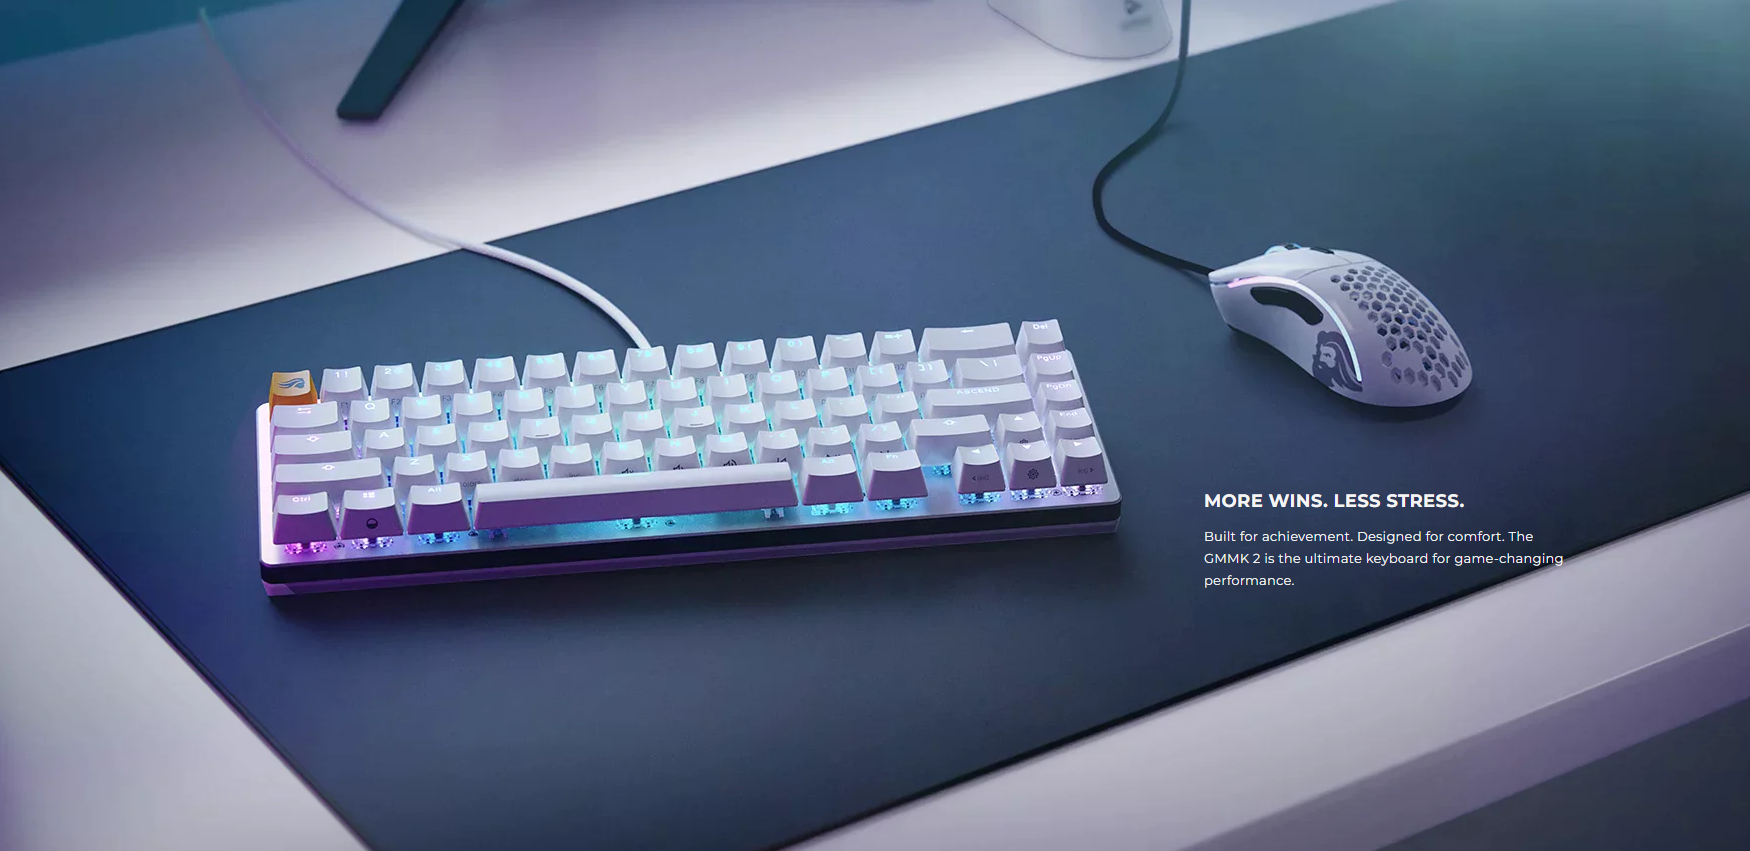 A large marketing image providing additional information about the product Glorious GMMK 2 96% Mechanical Keyboard - Pink (Prebuilt) - Additional alt info not provided